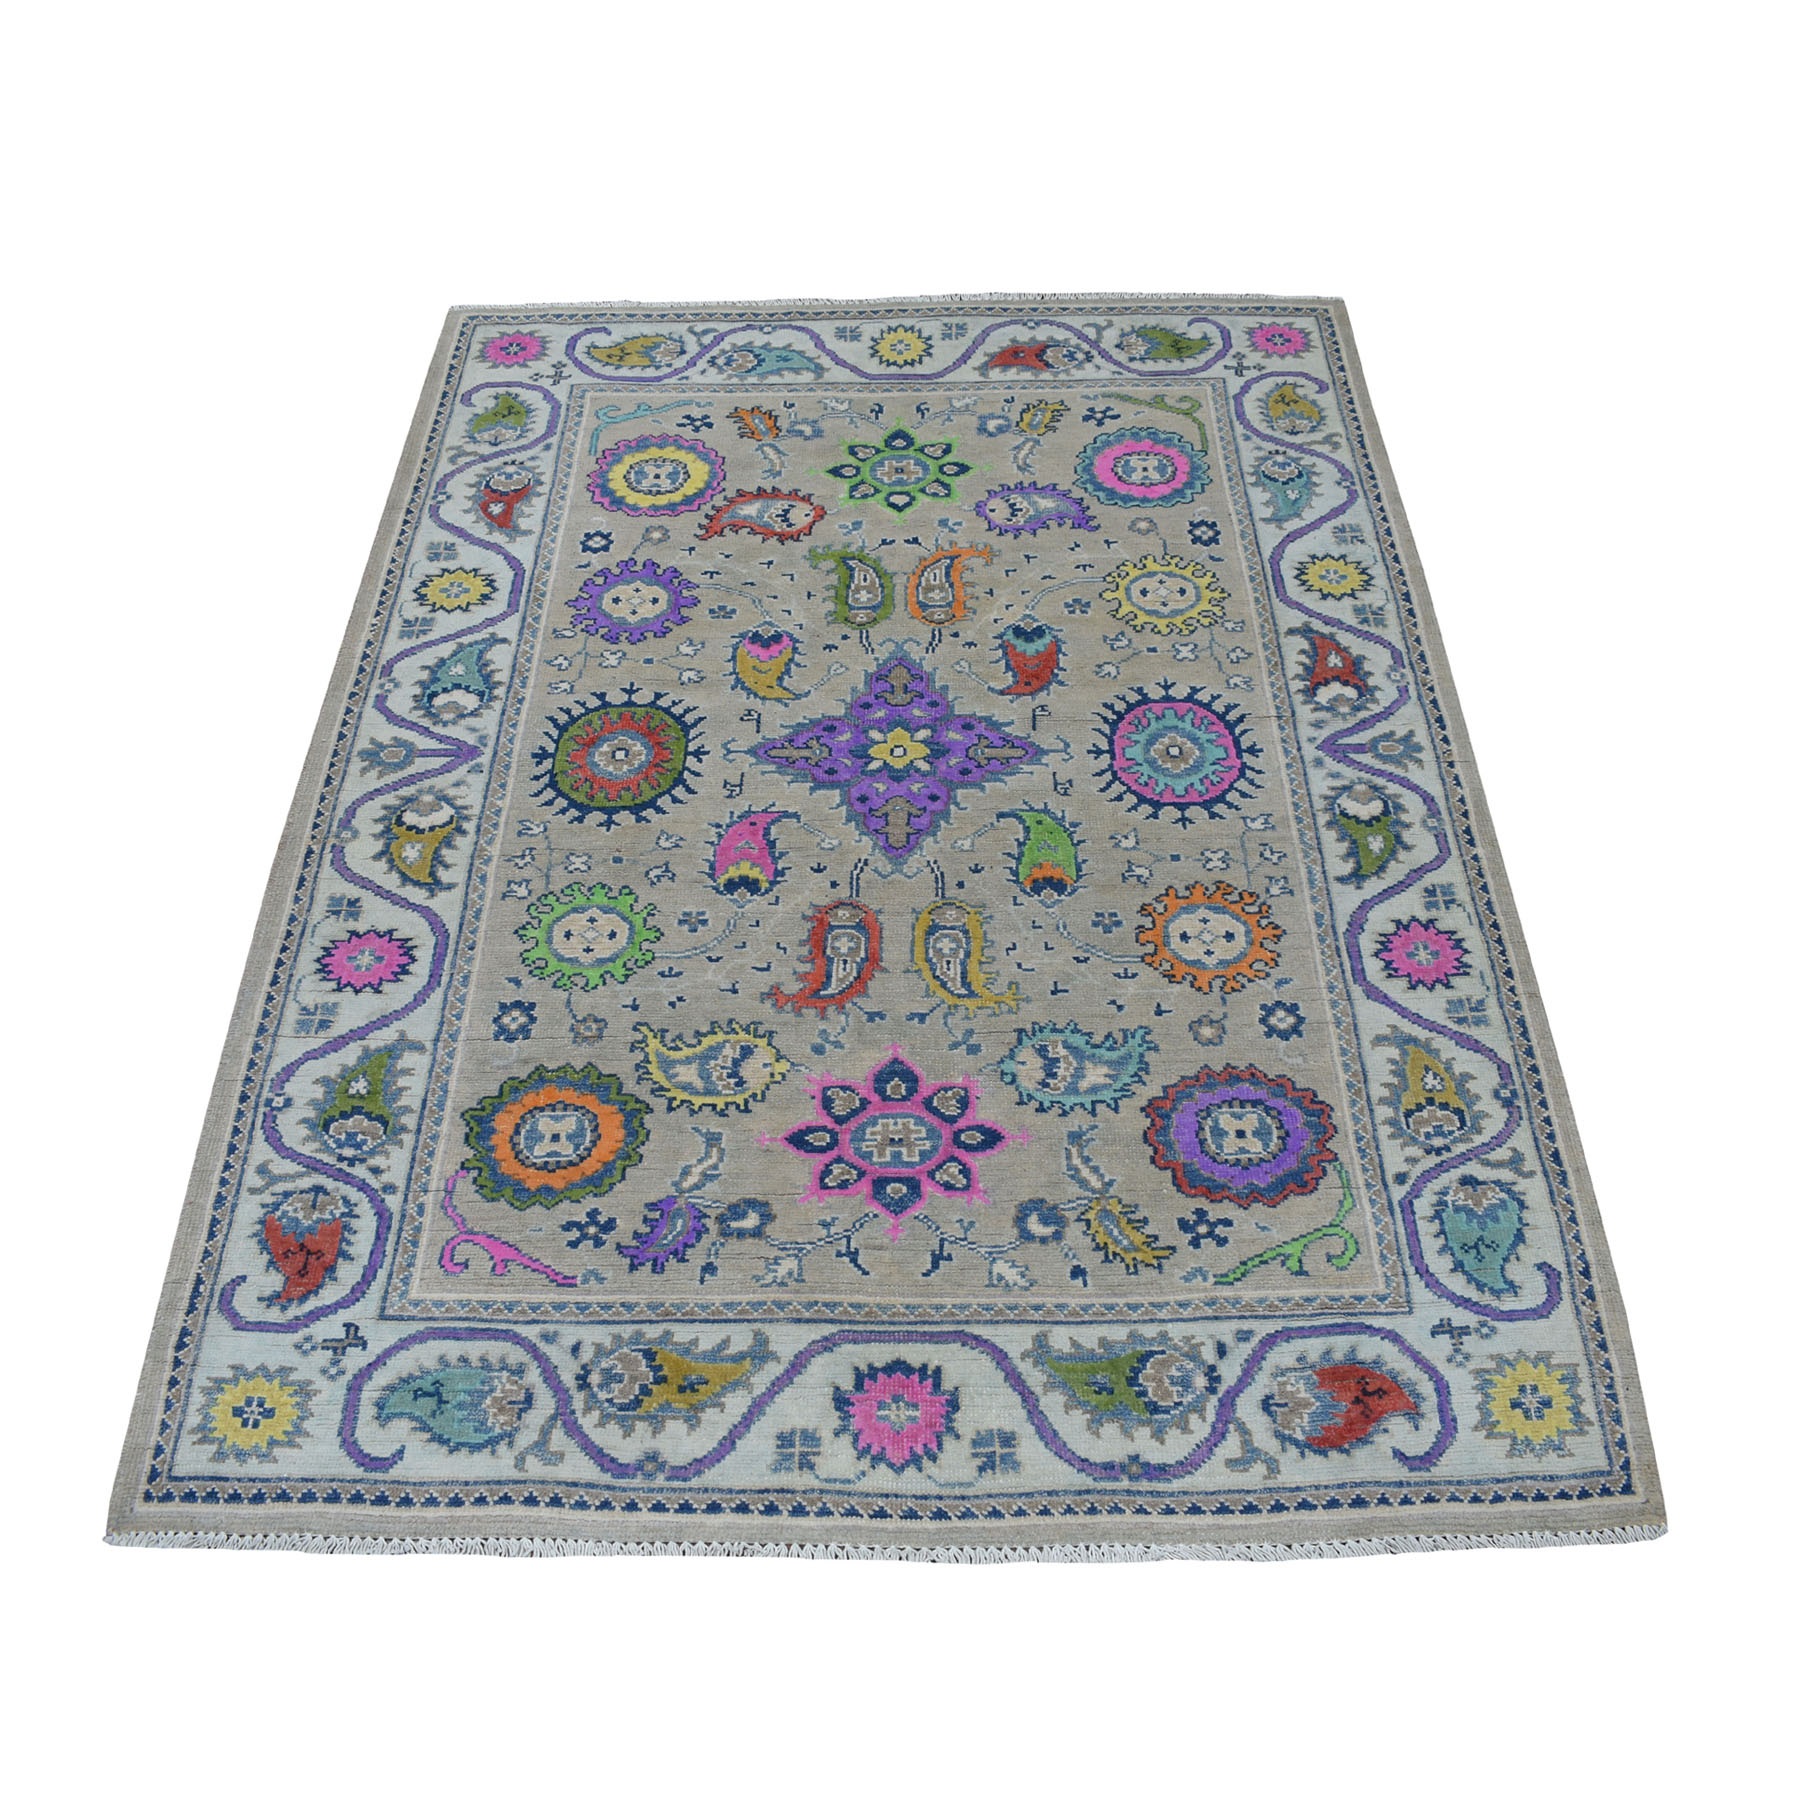 4'X5'9" Colorful Gray Fusion Kazak Pure Wool Geometric Design Hand Knotted Oriental Rug moaec807